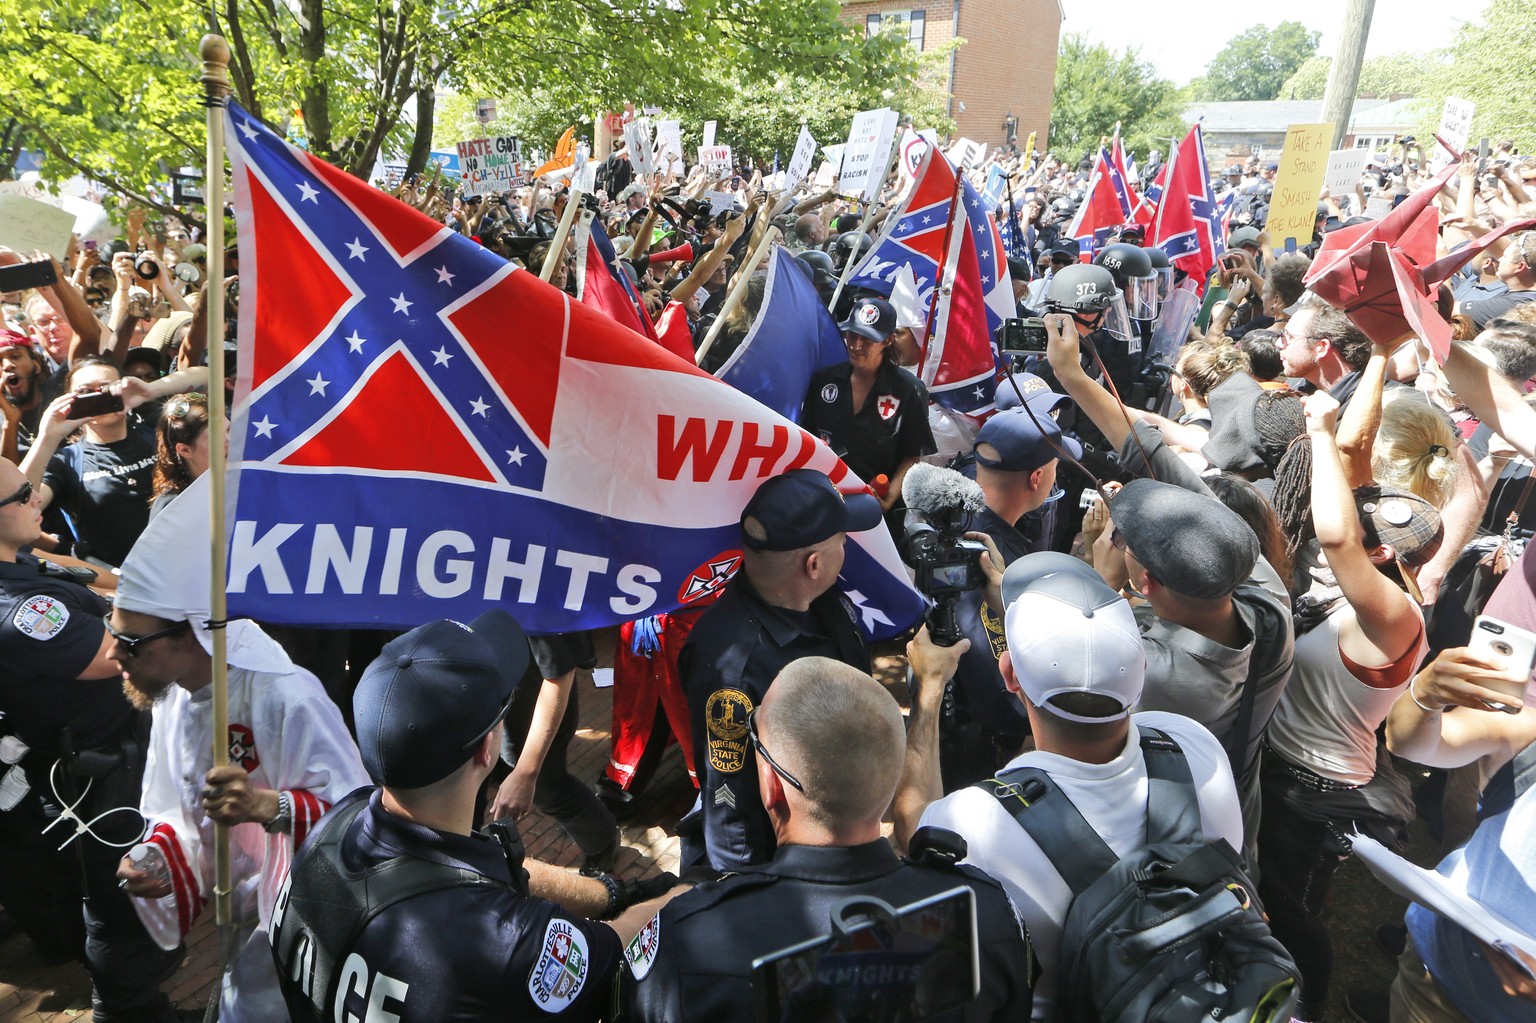 This July 8, 2017 photo shows members of the KKK escorted by police past a large group of protesters during a KKK rally in Charlottesville, Va. Some white Southerners are again advocating for what the ...